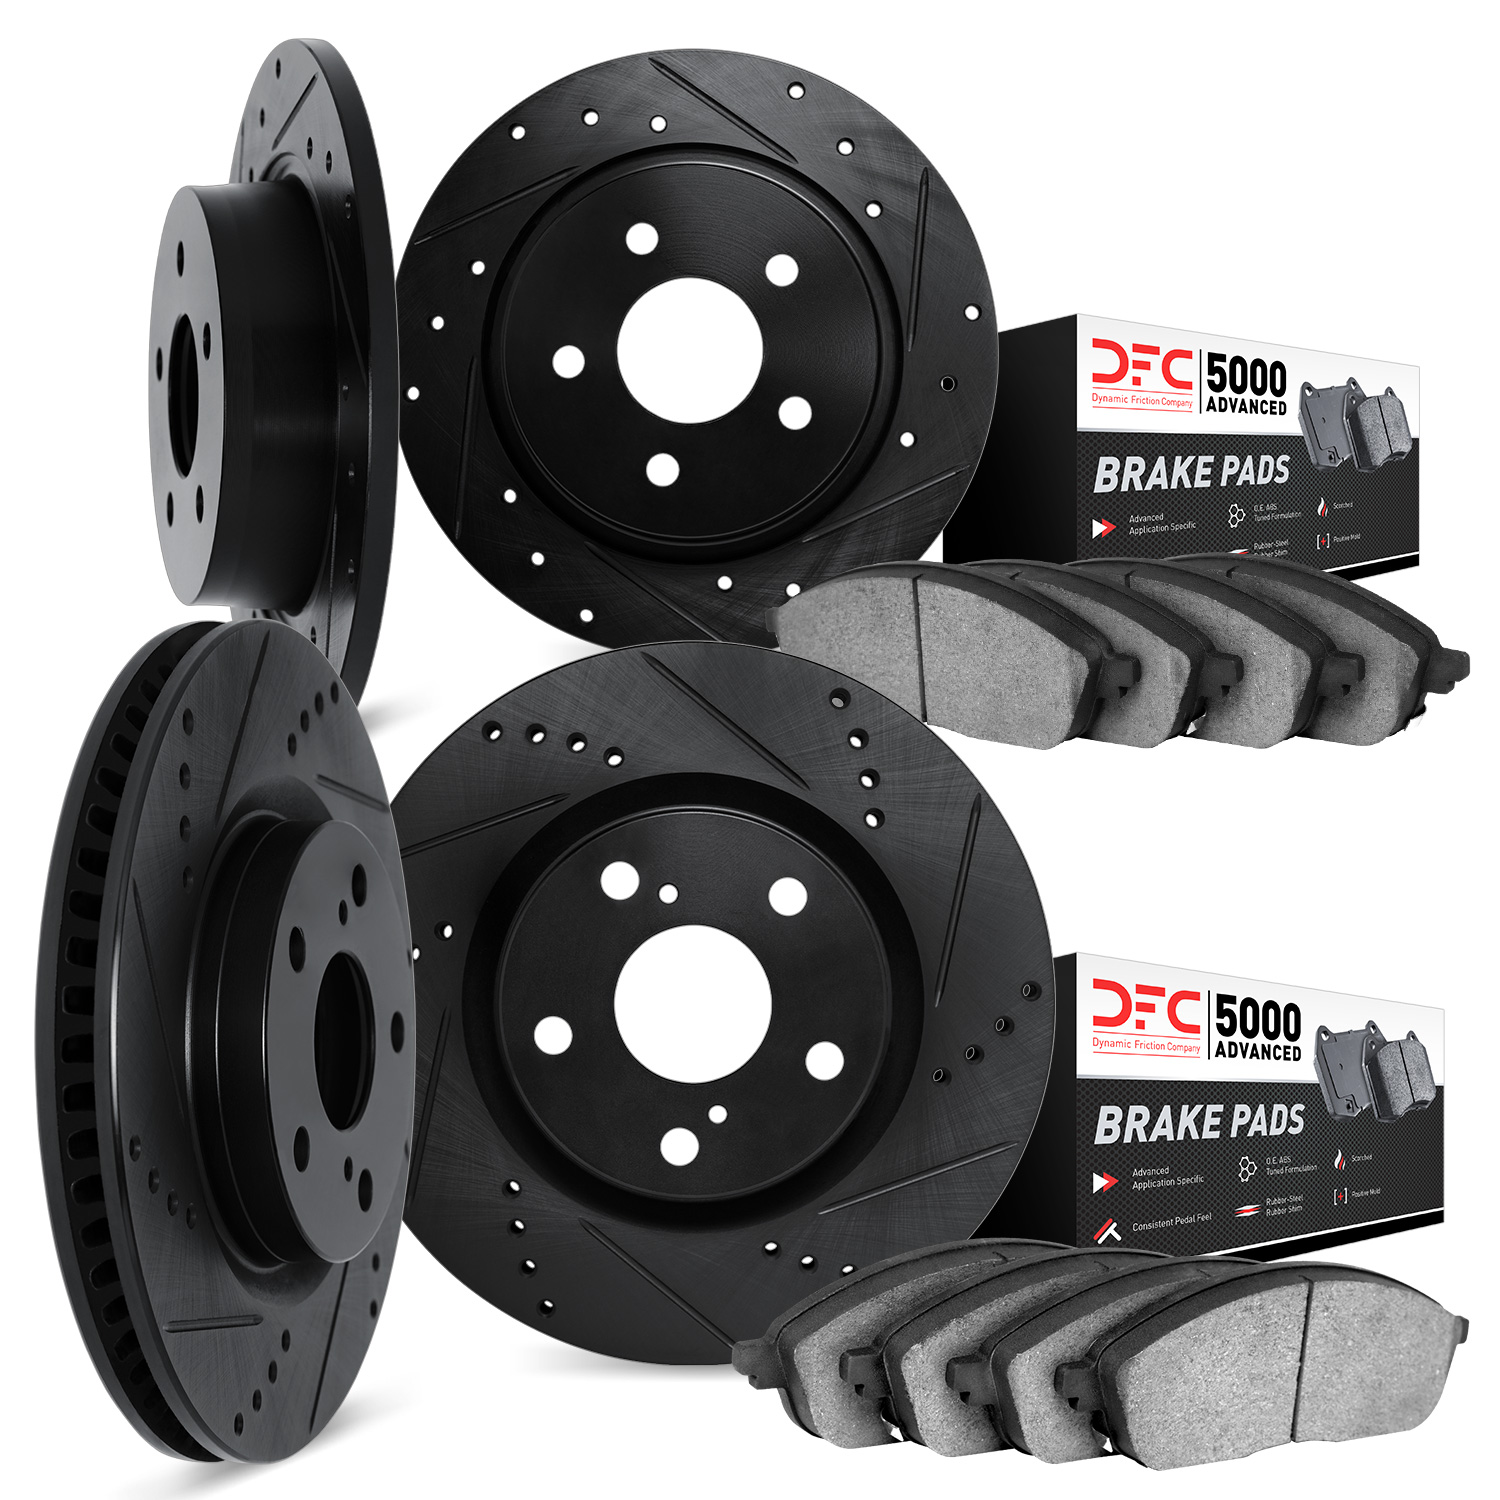 8504-13000 Drilled/Slotted Brake Rotors w/5000 Advanced Brake Pads Kit [Black], 1990-1996 Subaru, Position: Front and Rear